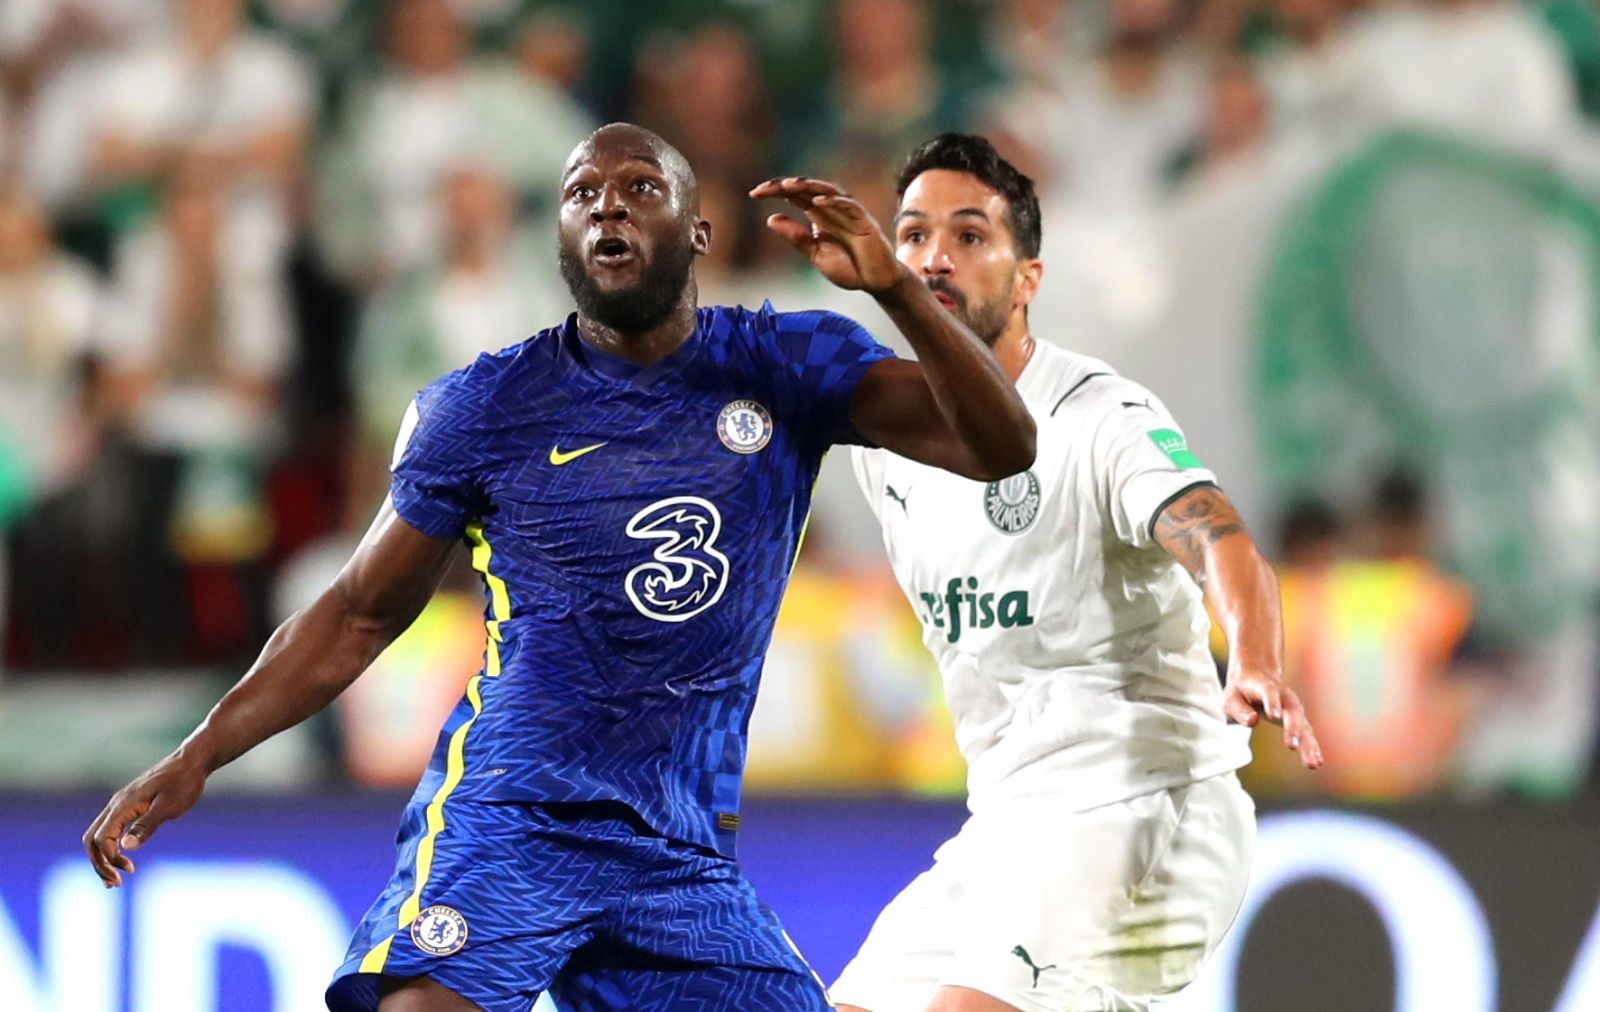 epa09750432 Romelu Lukaku (L) of Chelsea in action against Luan (R) of Palmeiras during the FIFA Club World Cup 2021 final soccer match between Chelsea FC and SE Palmeiras in Abu Dhabi, United Arab Emirates, 12 February 2022.  EPA/ALI HAIDER